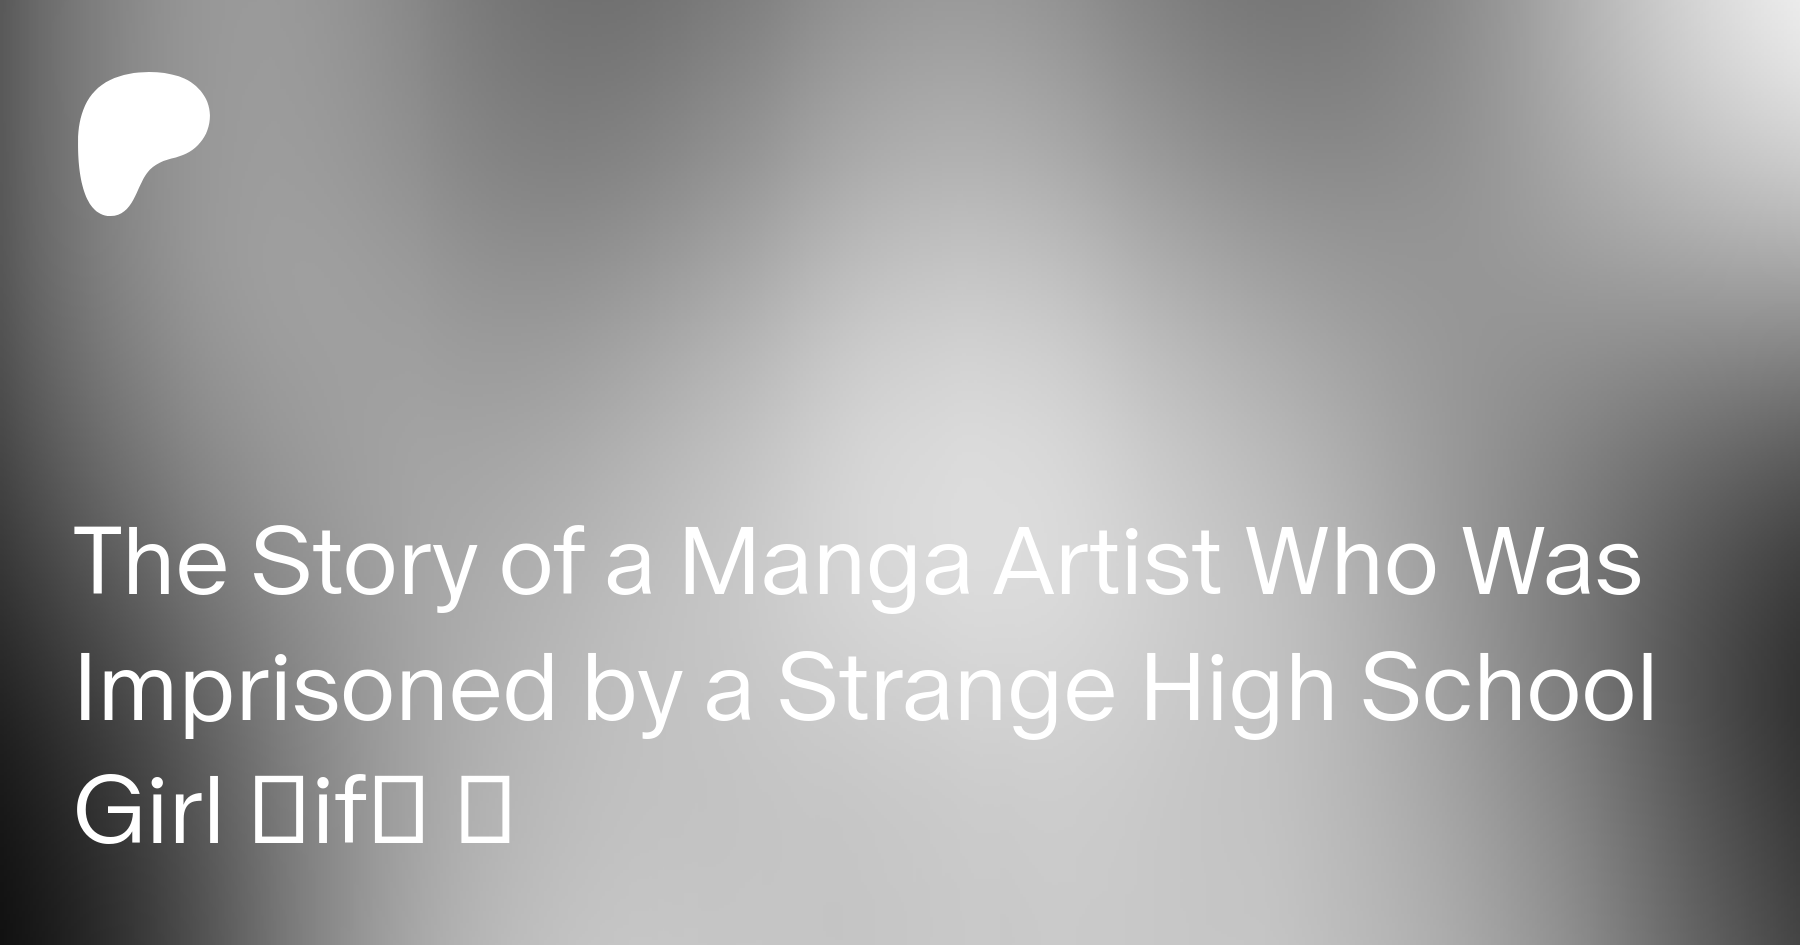 The Story of a Manga Artist Who Was Imprisoned by a Strange High